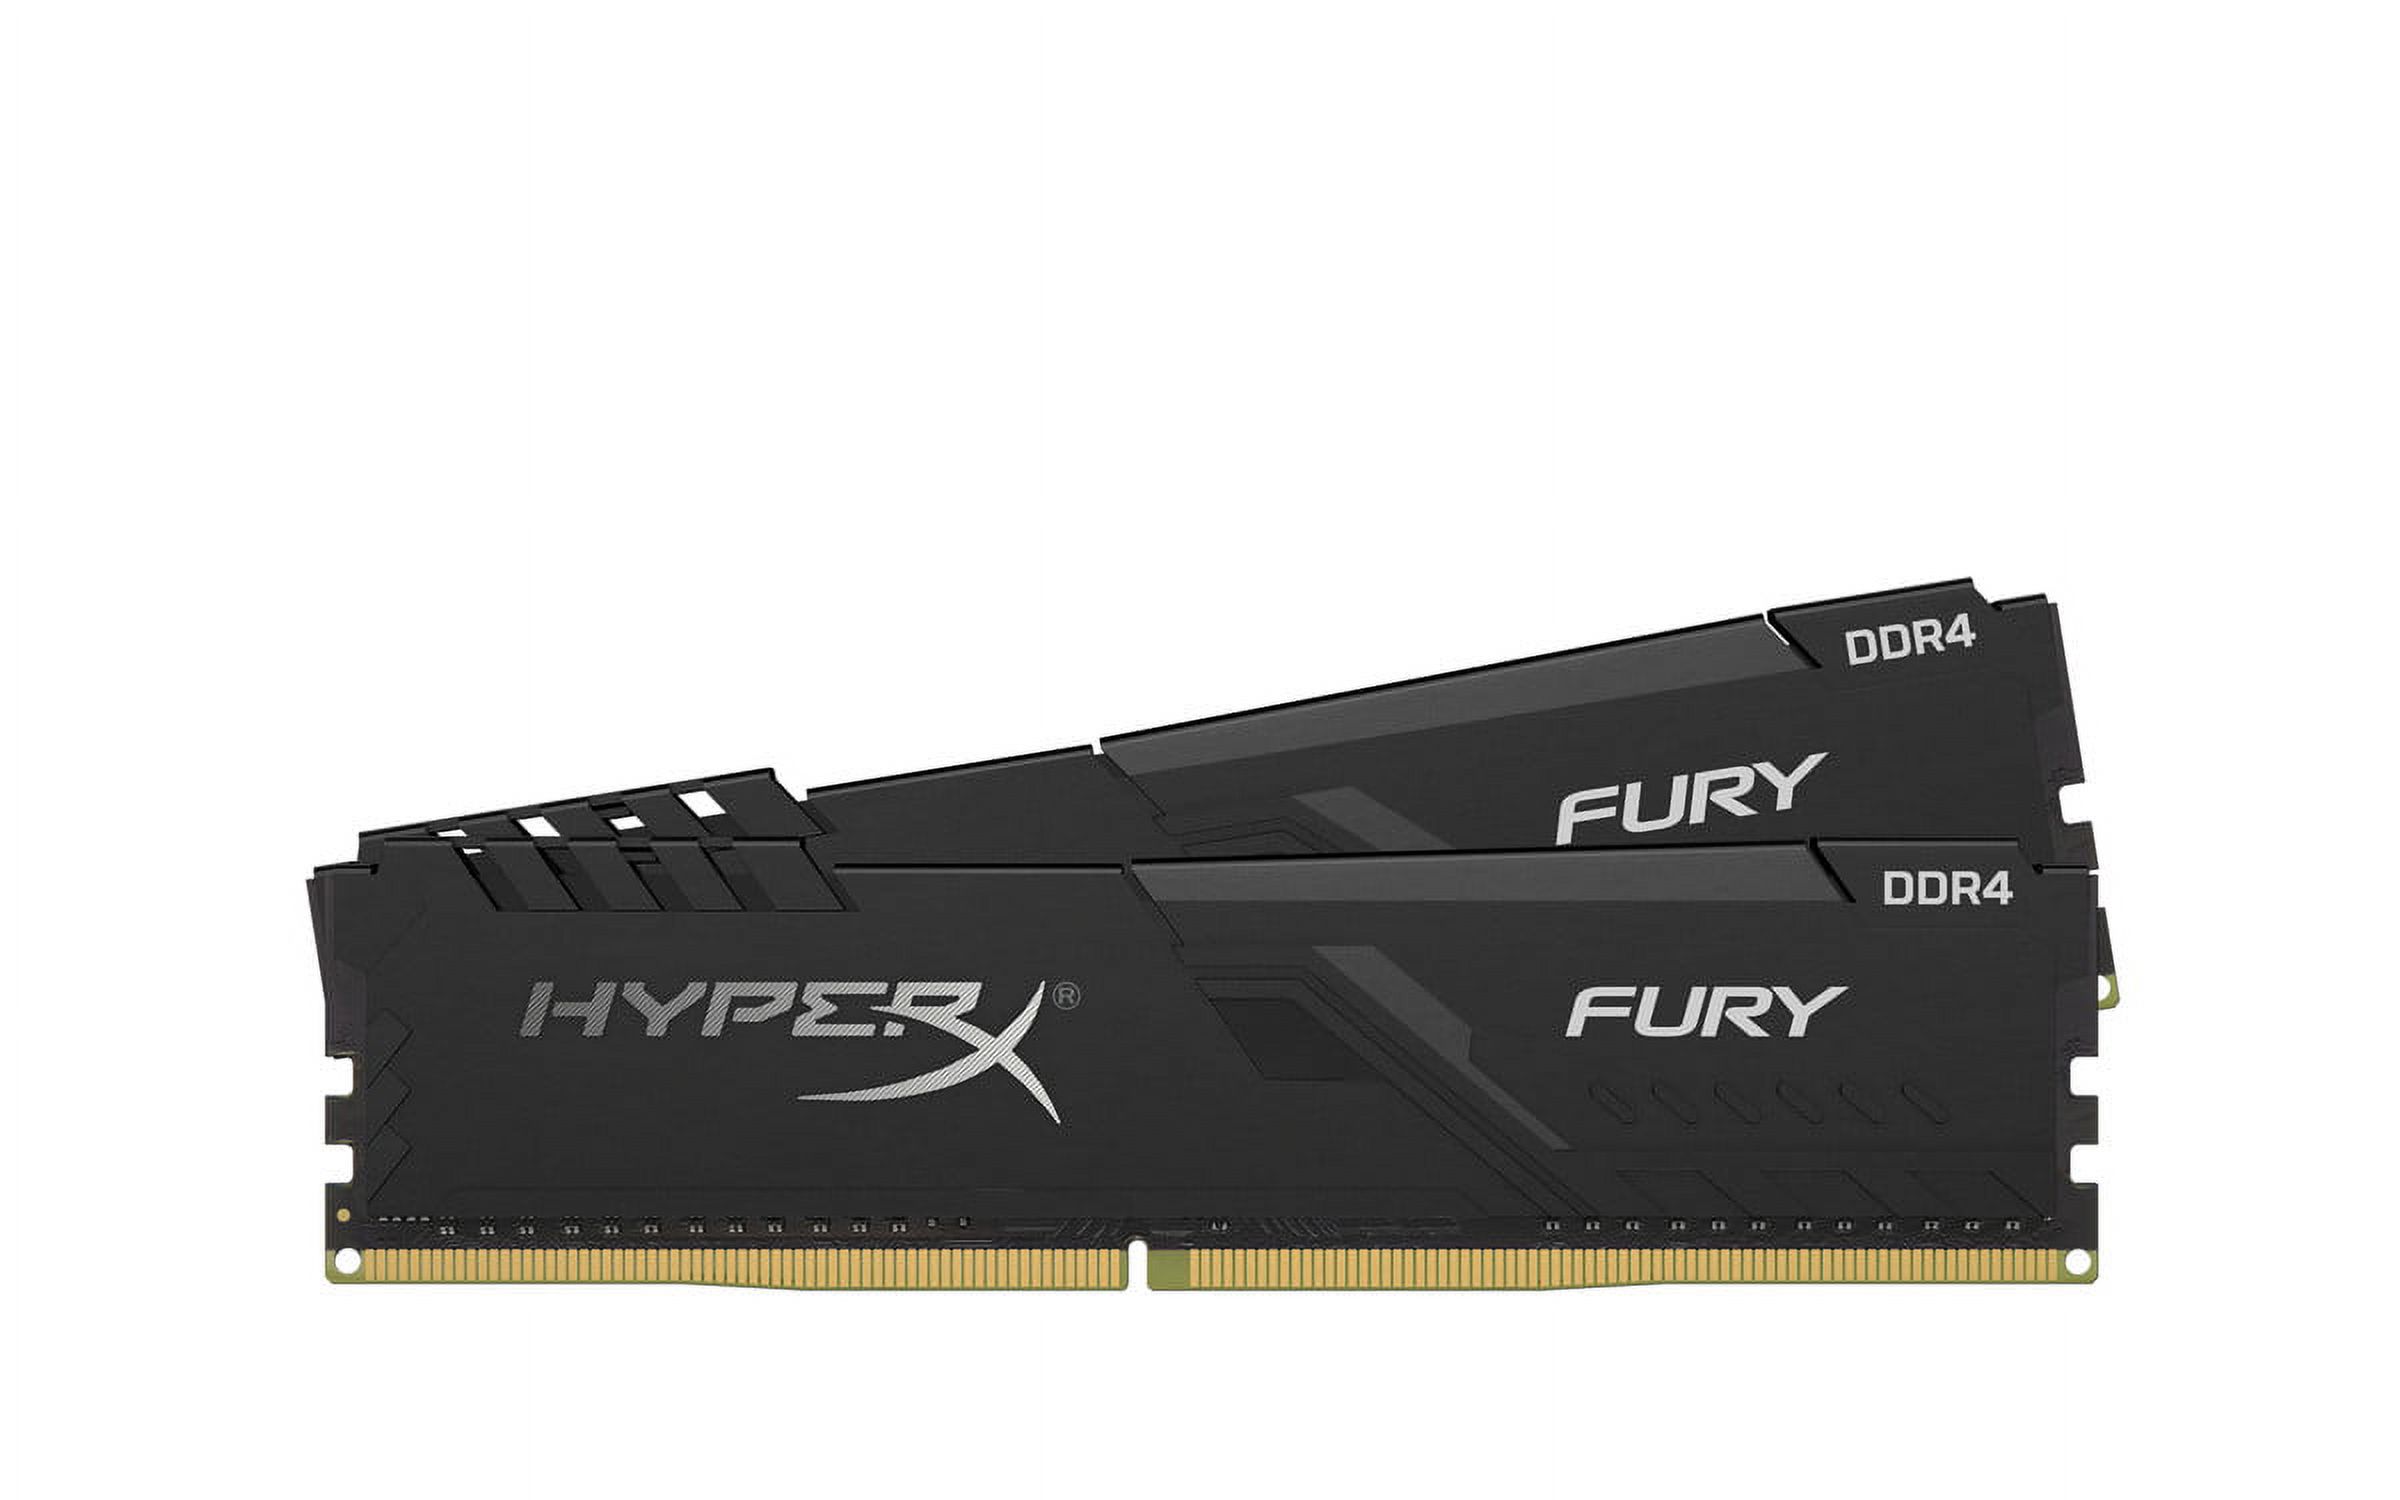 HyperX Fury 16GB 3200MHz DDR4 CL15 DIMM (Kit of 2) 1Rx8 Black - image 1 of 5